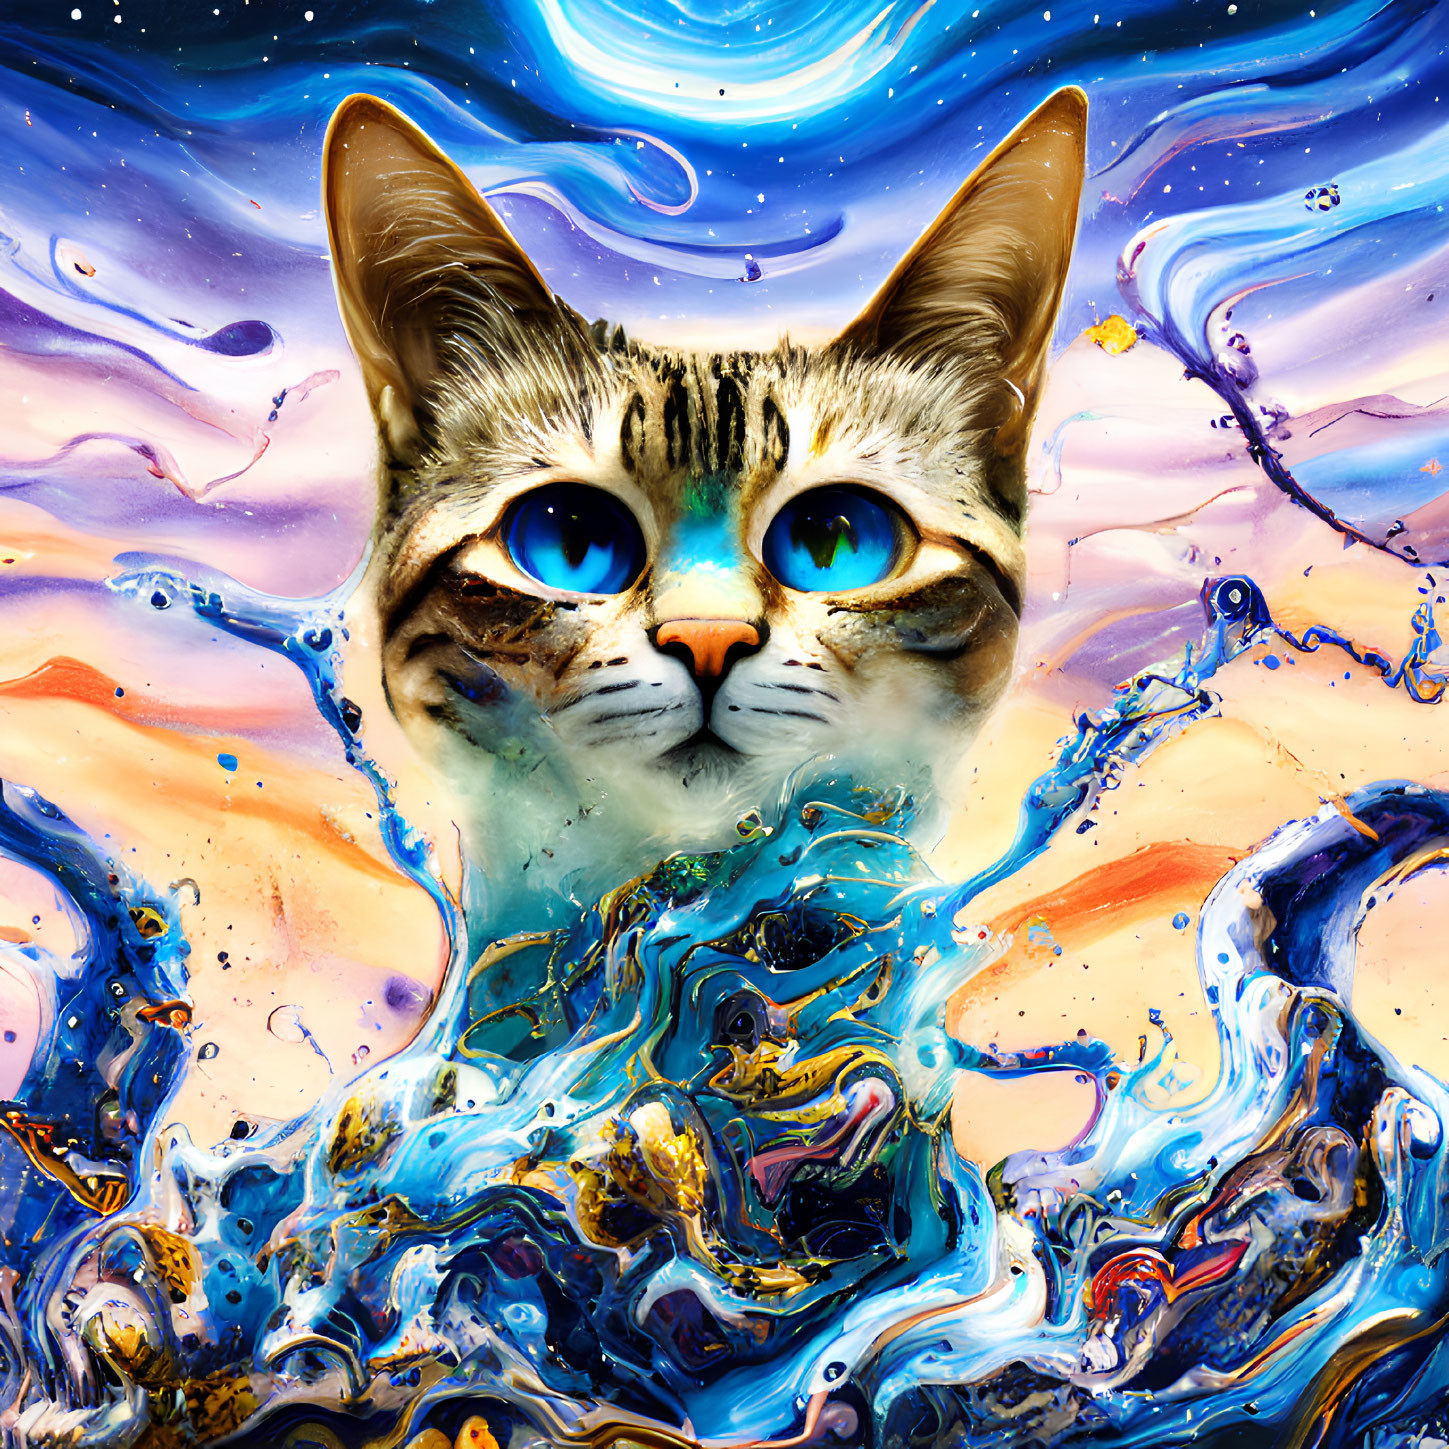 Surreal cat head with blue eyes in colorful swirls.